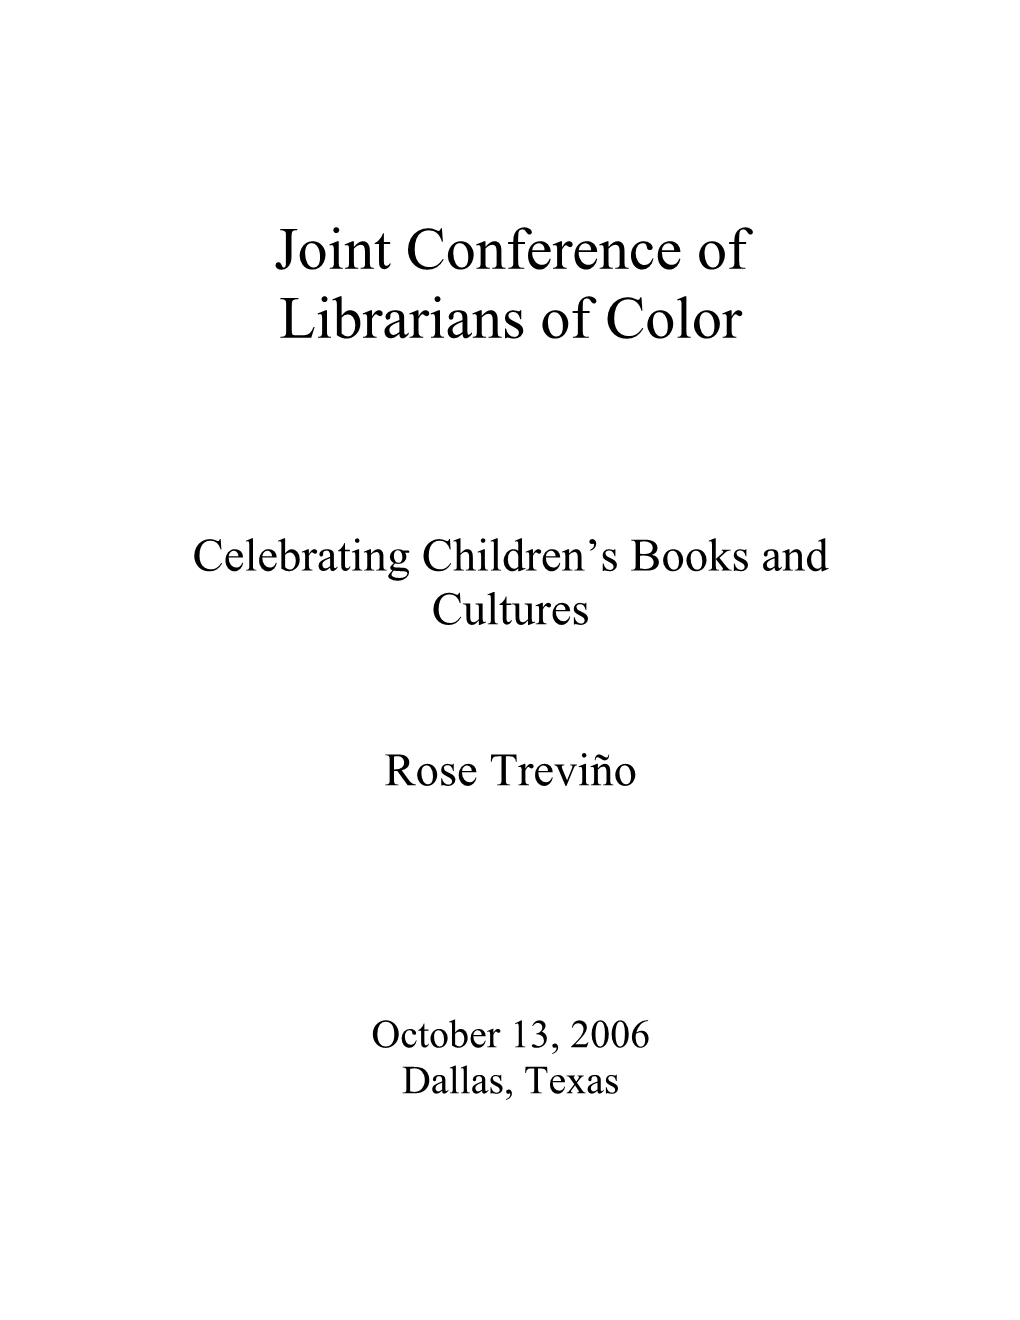 Celebrating Children, Books, and Cultures